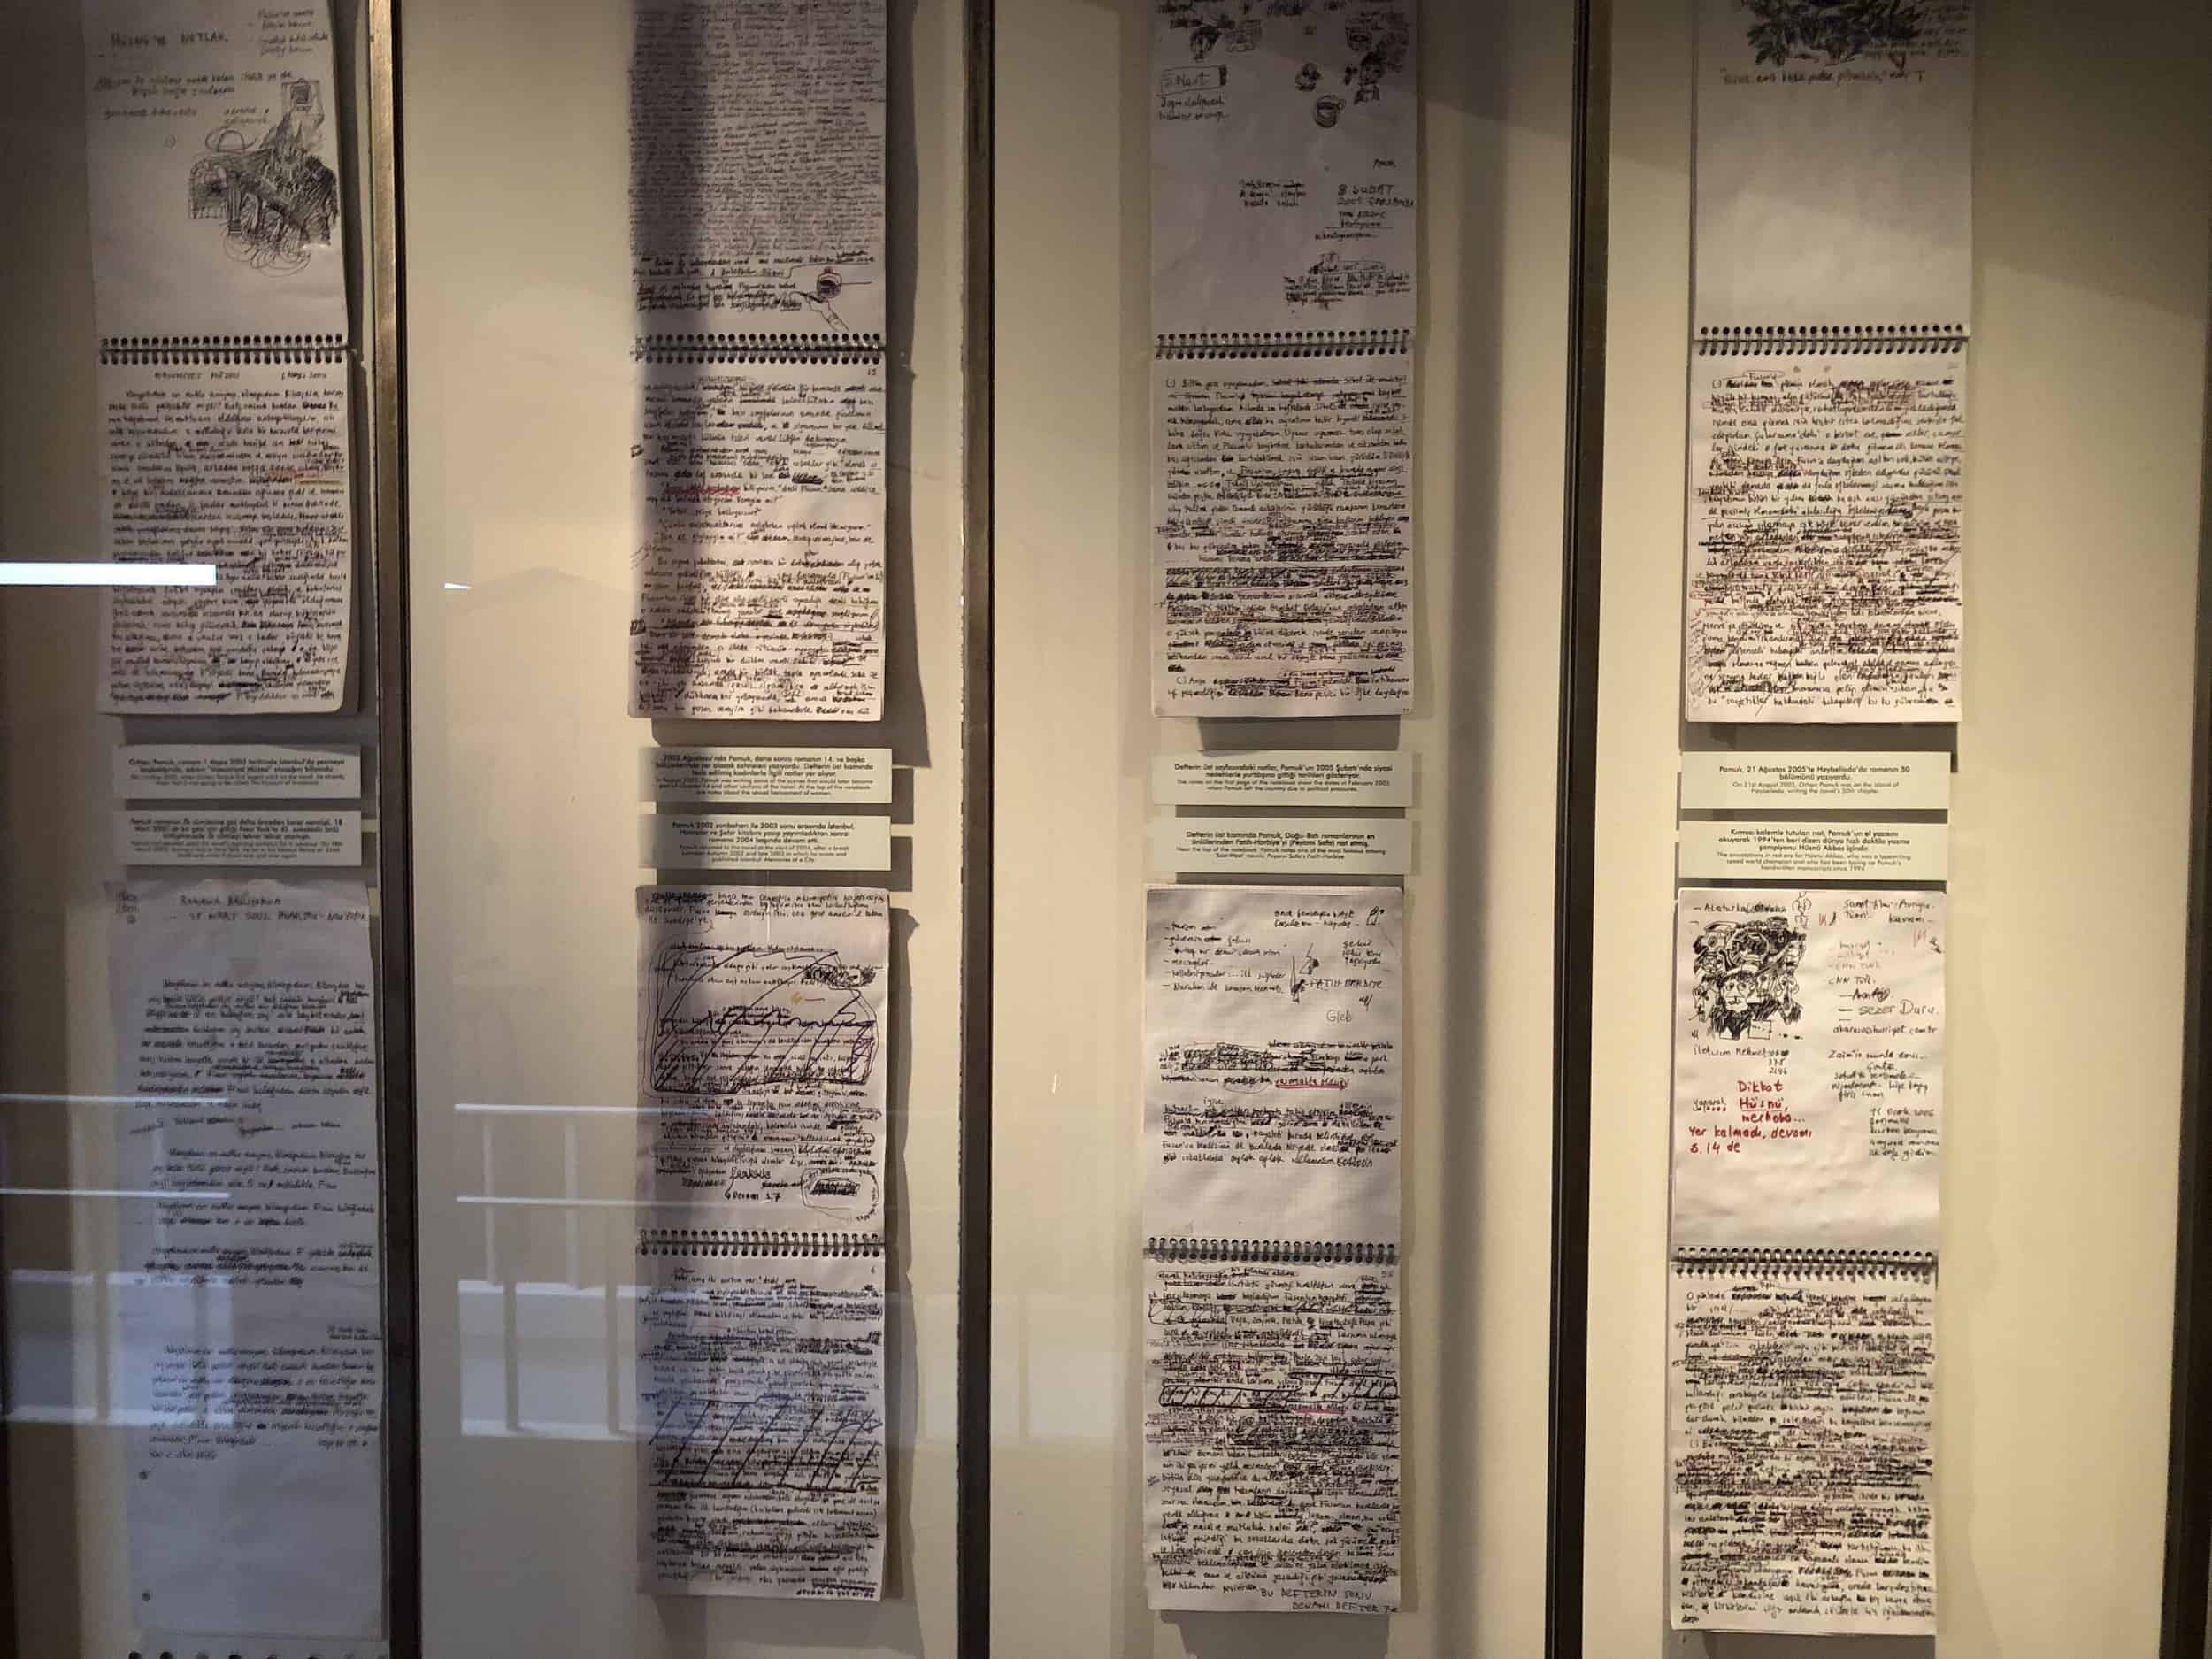 Notes by Orhan Pamuk at the Museum of Innocence in Istanbul, Turkey